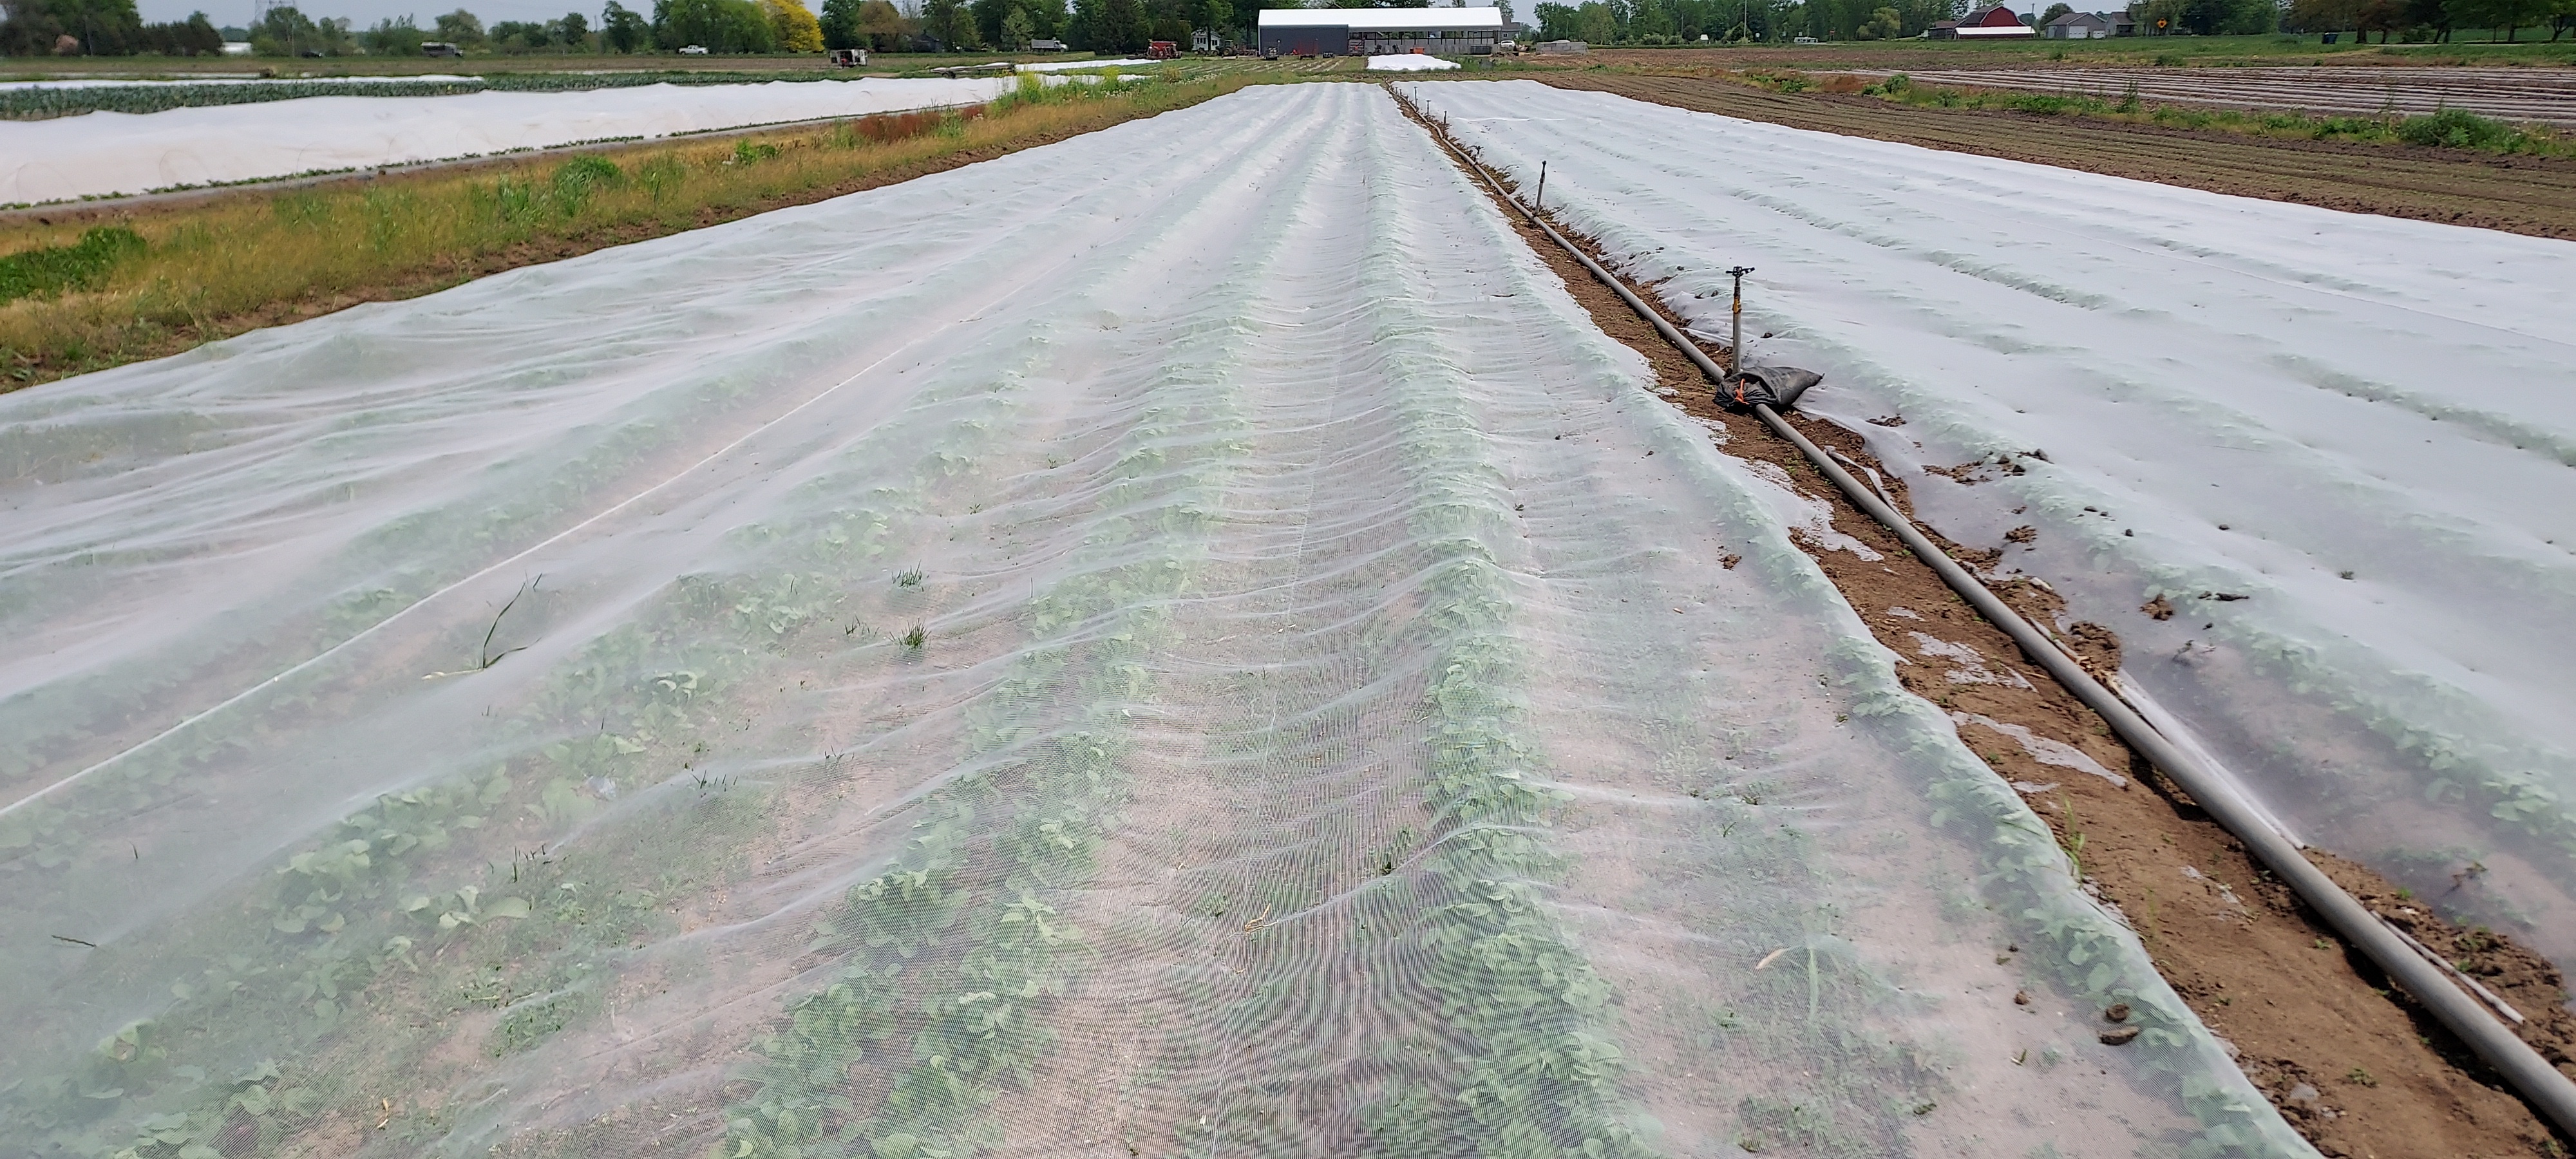 Irrigation considerations for the small vegetable farm - MSU Extension